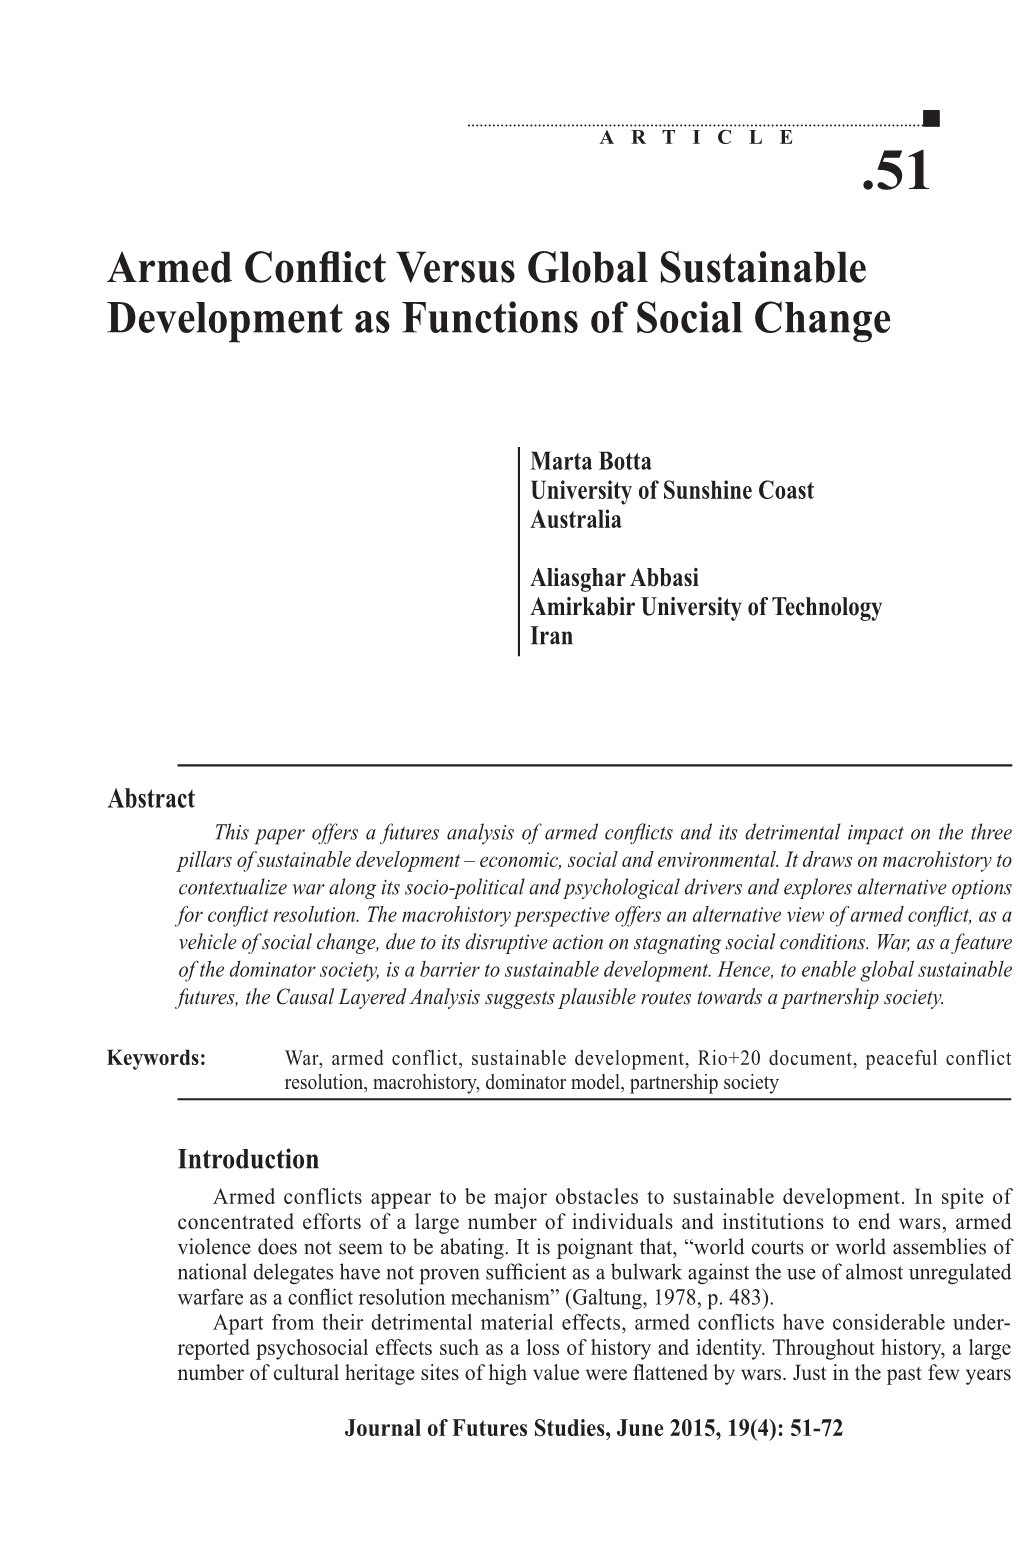 Armed Conflict Versus Global Sustainable Development As Functions of Social Change